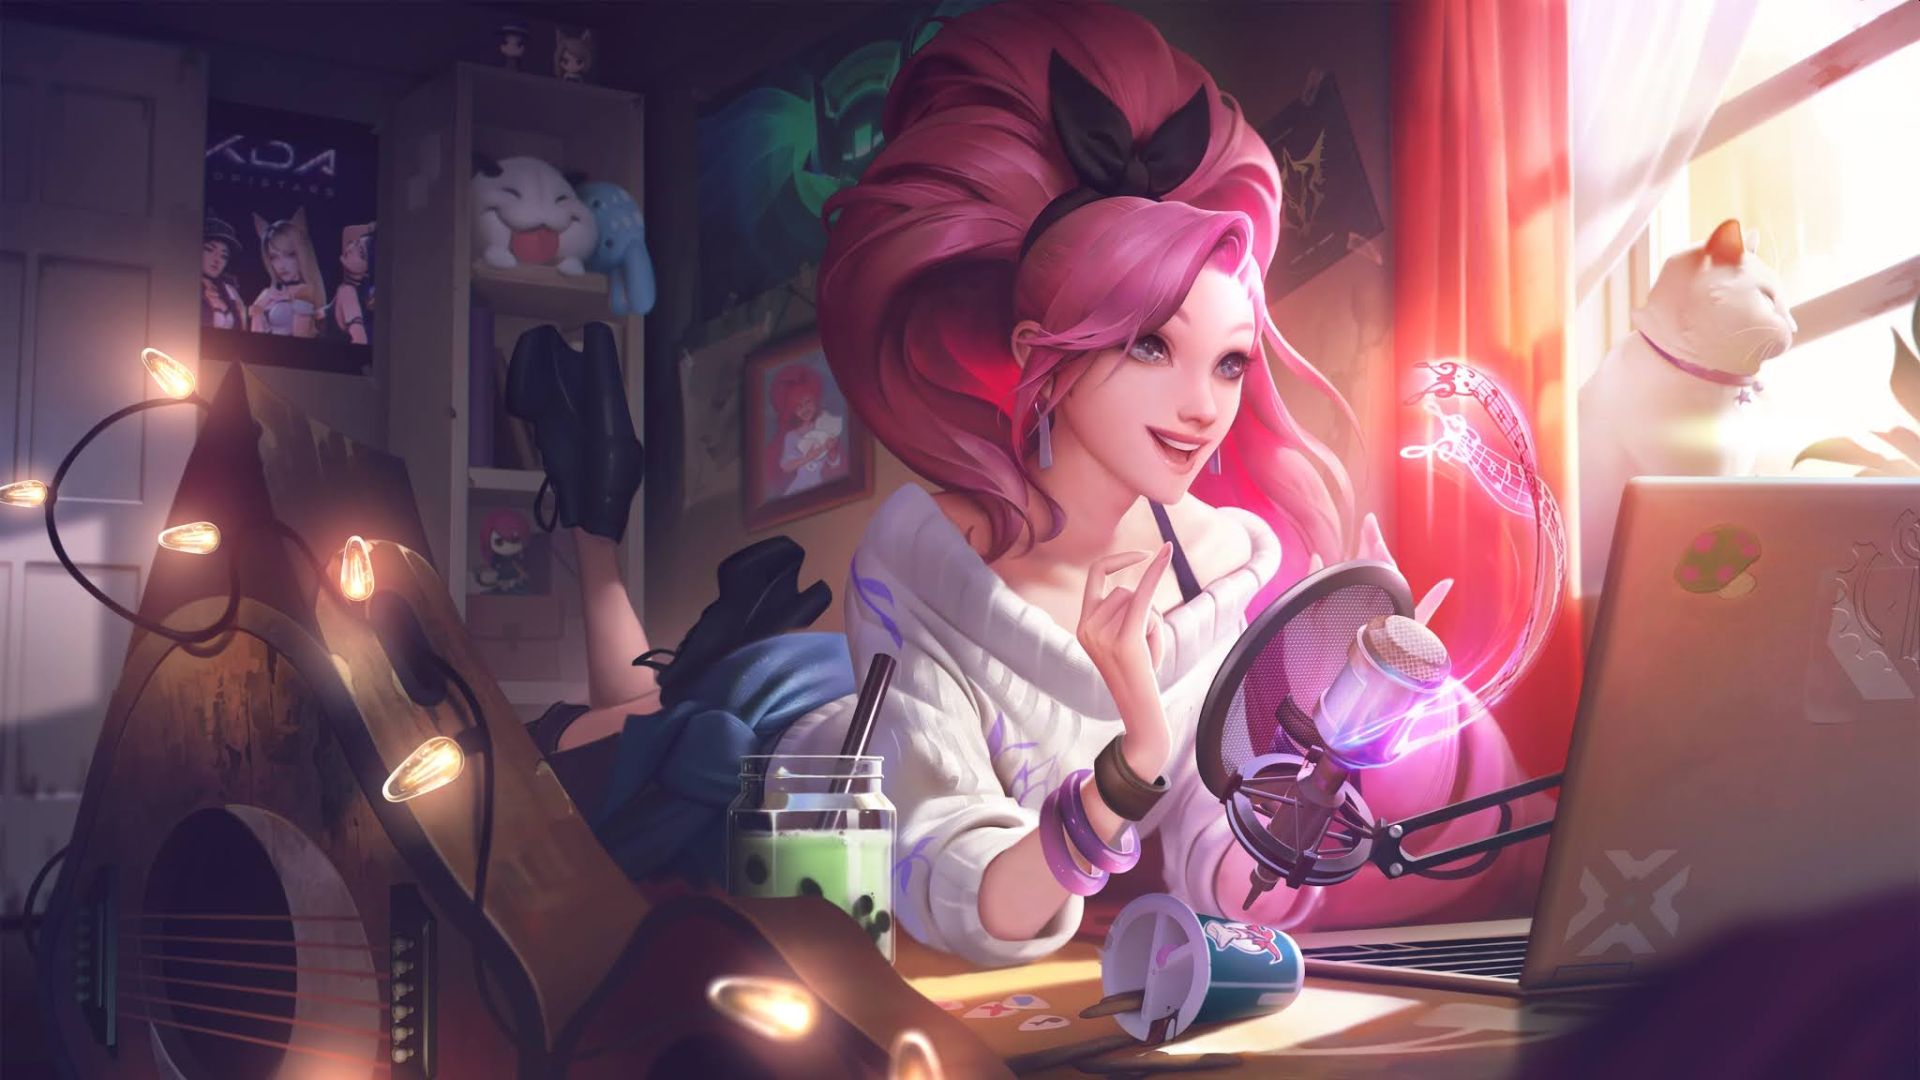 This Is How You Play And Carry With The Latest Released Whimsical Mage In League Of Legends – Seraphine